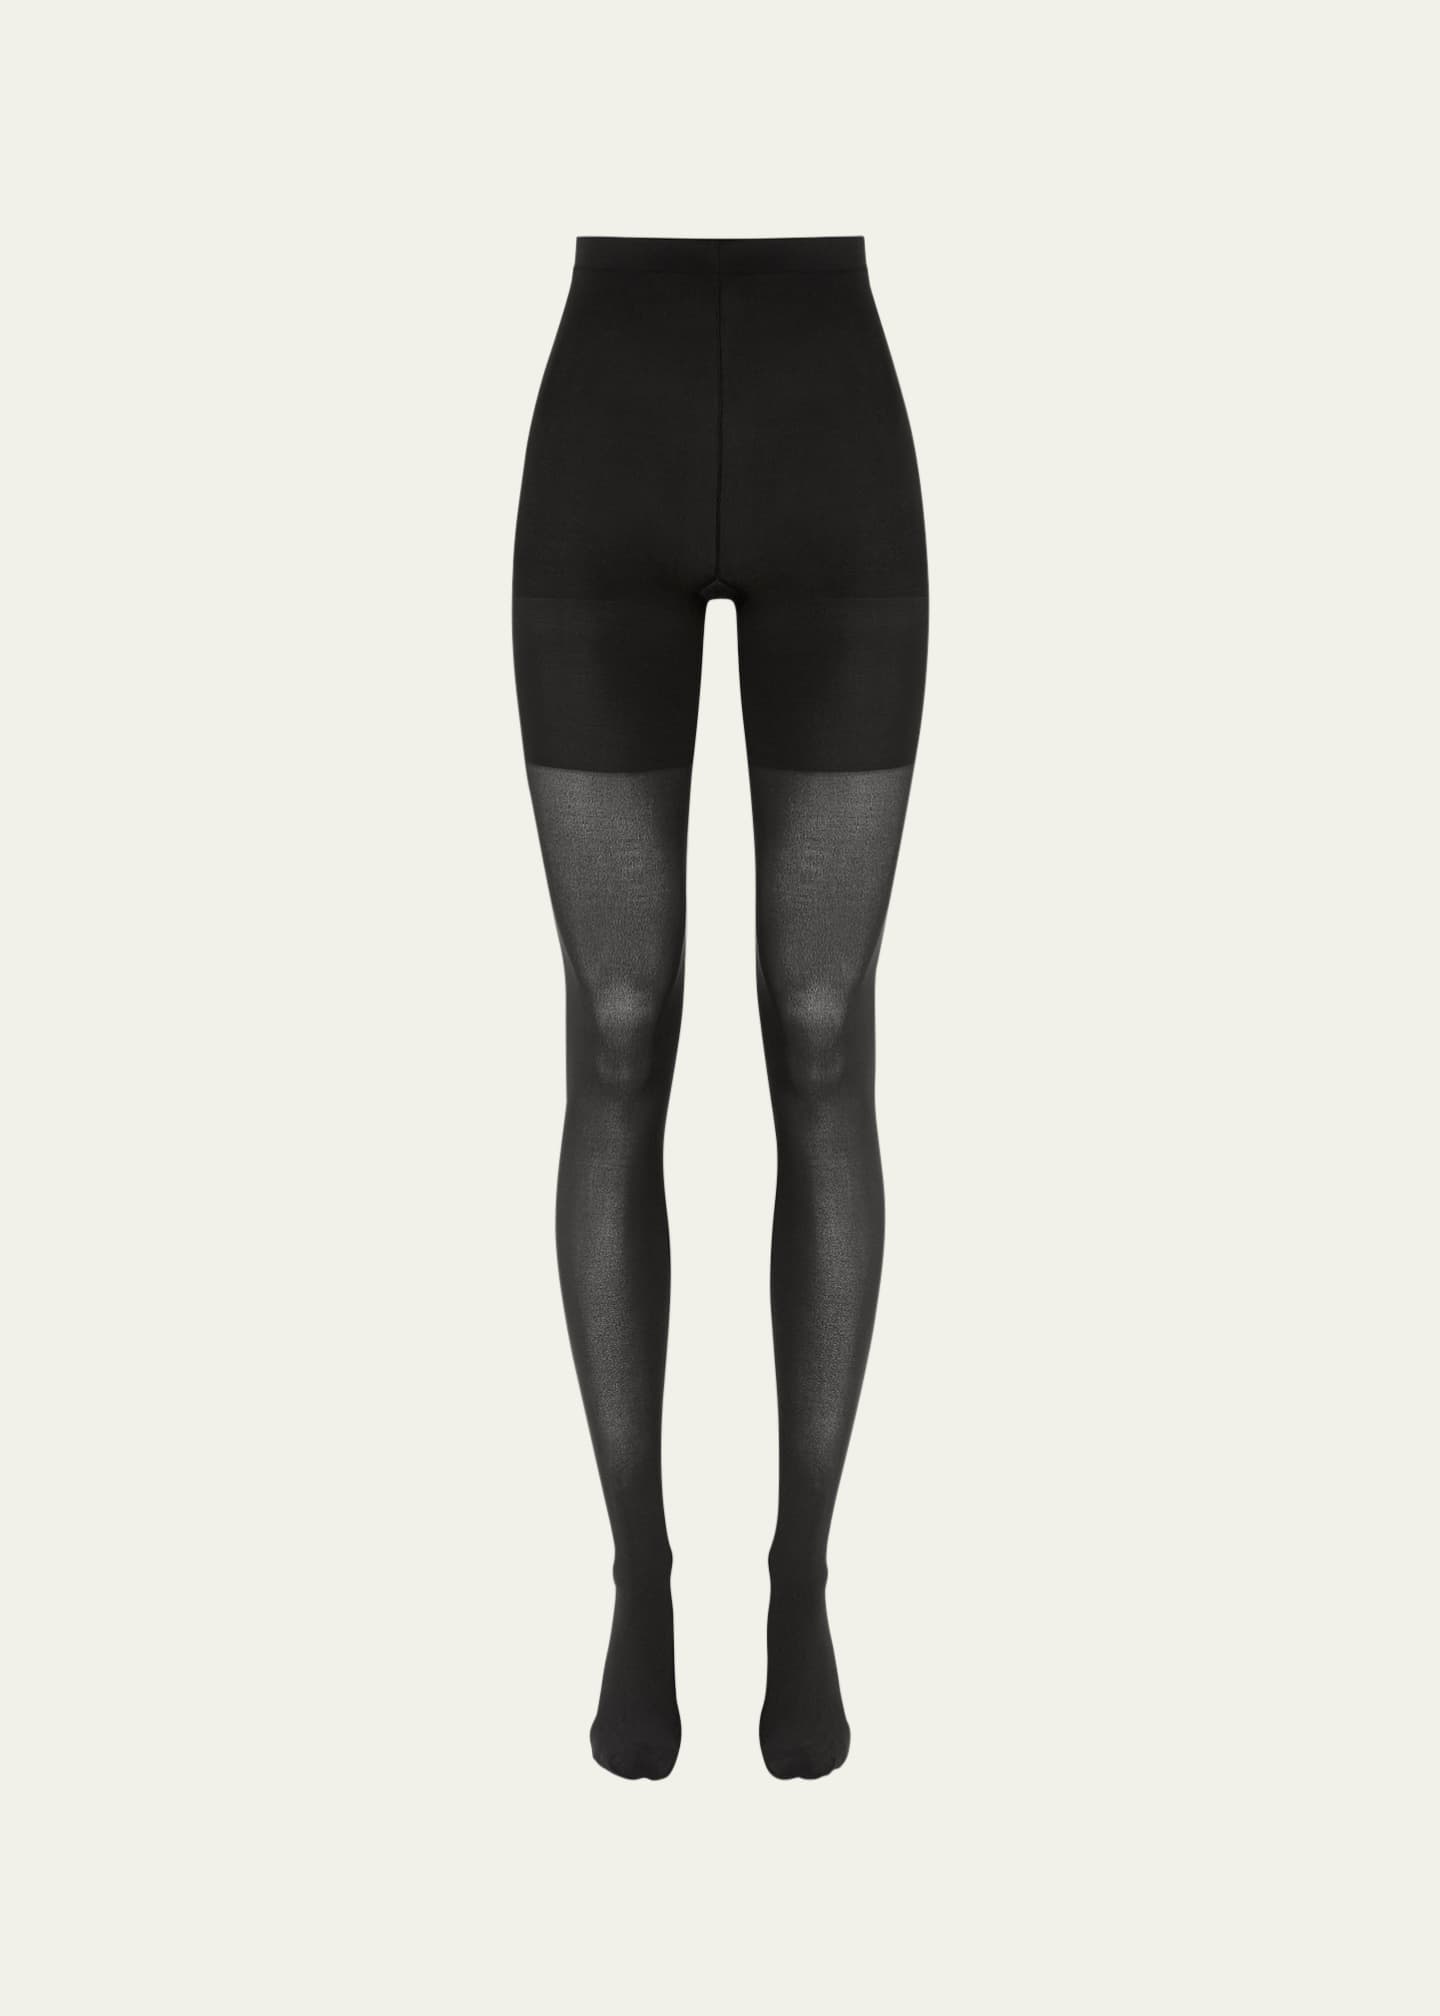 Spanx Luxe Sheer Shaping Tights Image 1 of 4